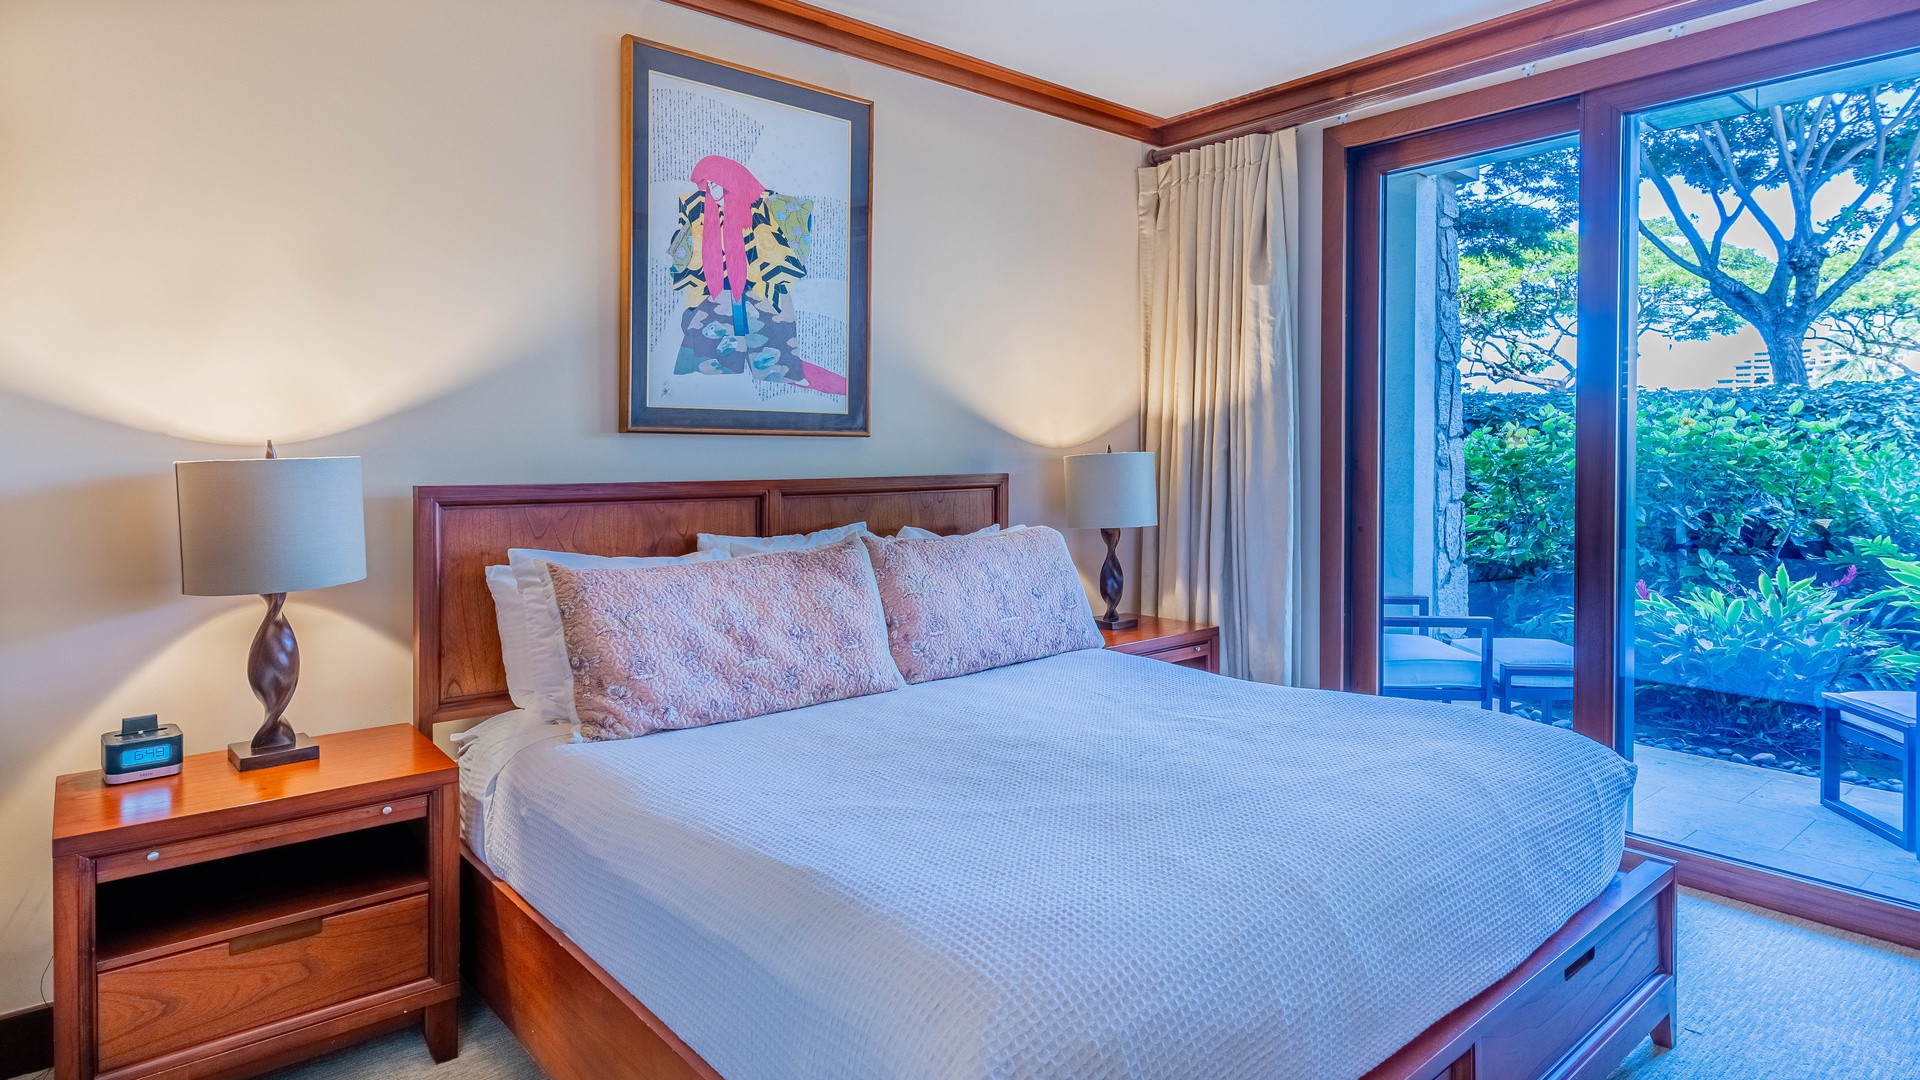 Kapolei Vacation Rentals, Ko Olina Beach Villas B102 - The primary guest bedroom features dual nightstands with lamps, dresser and TV.